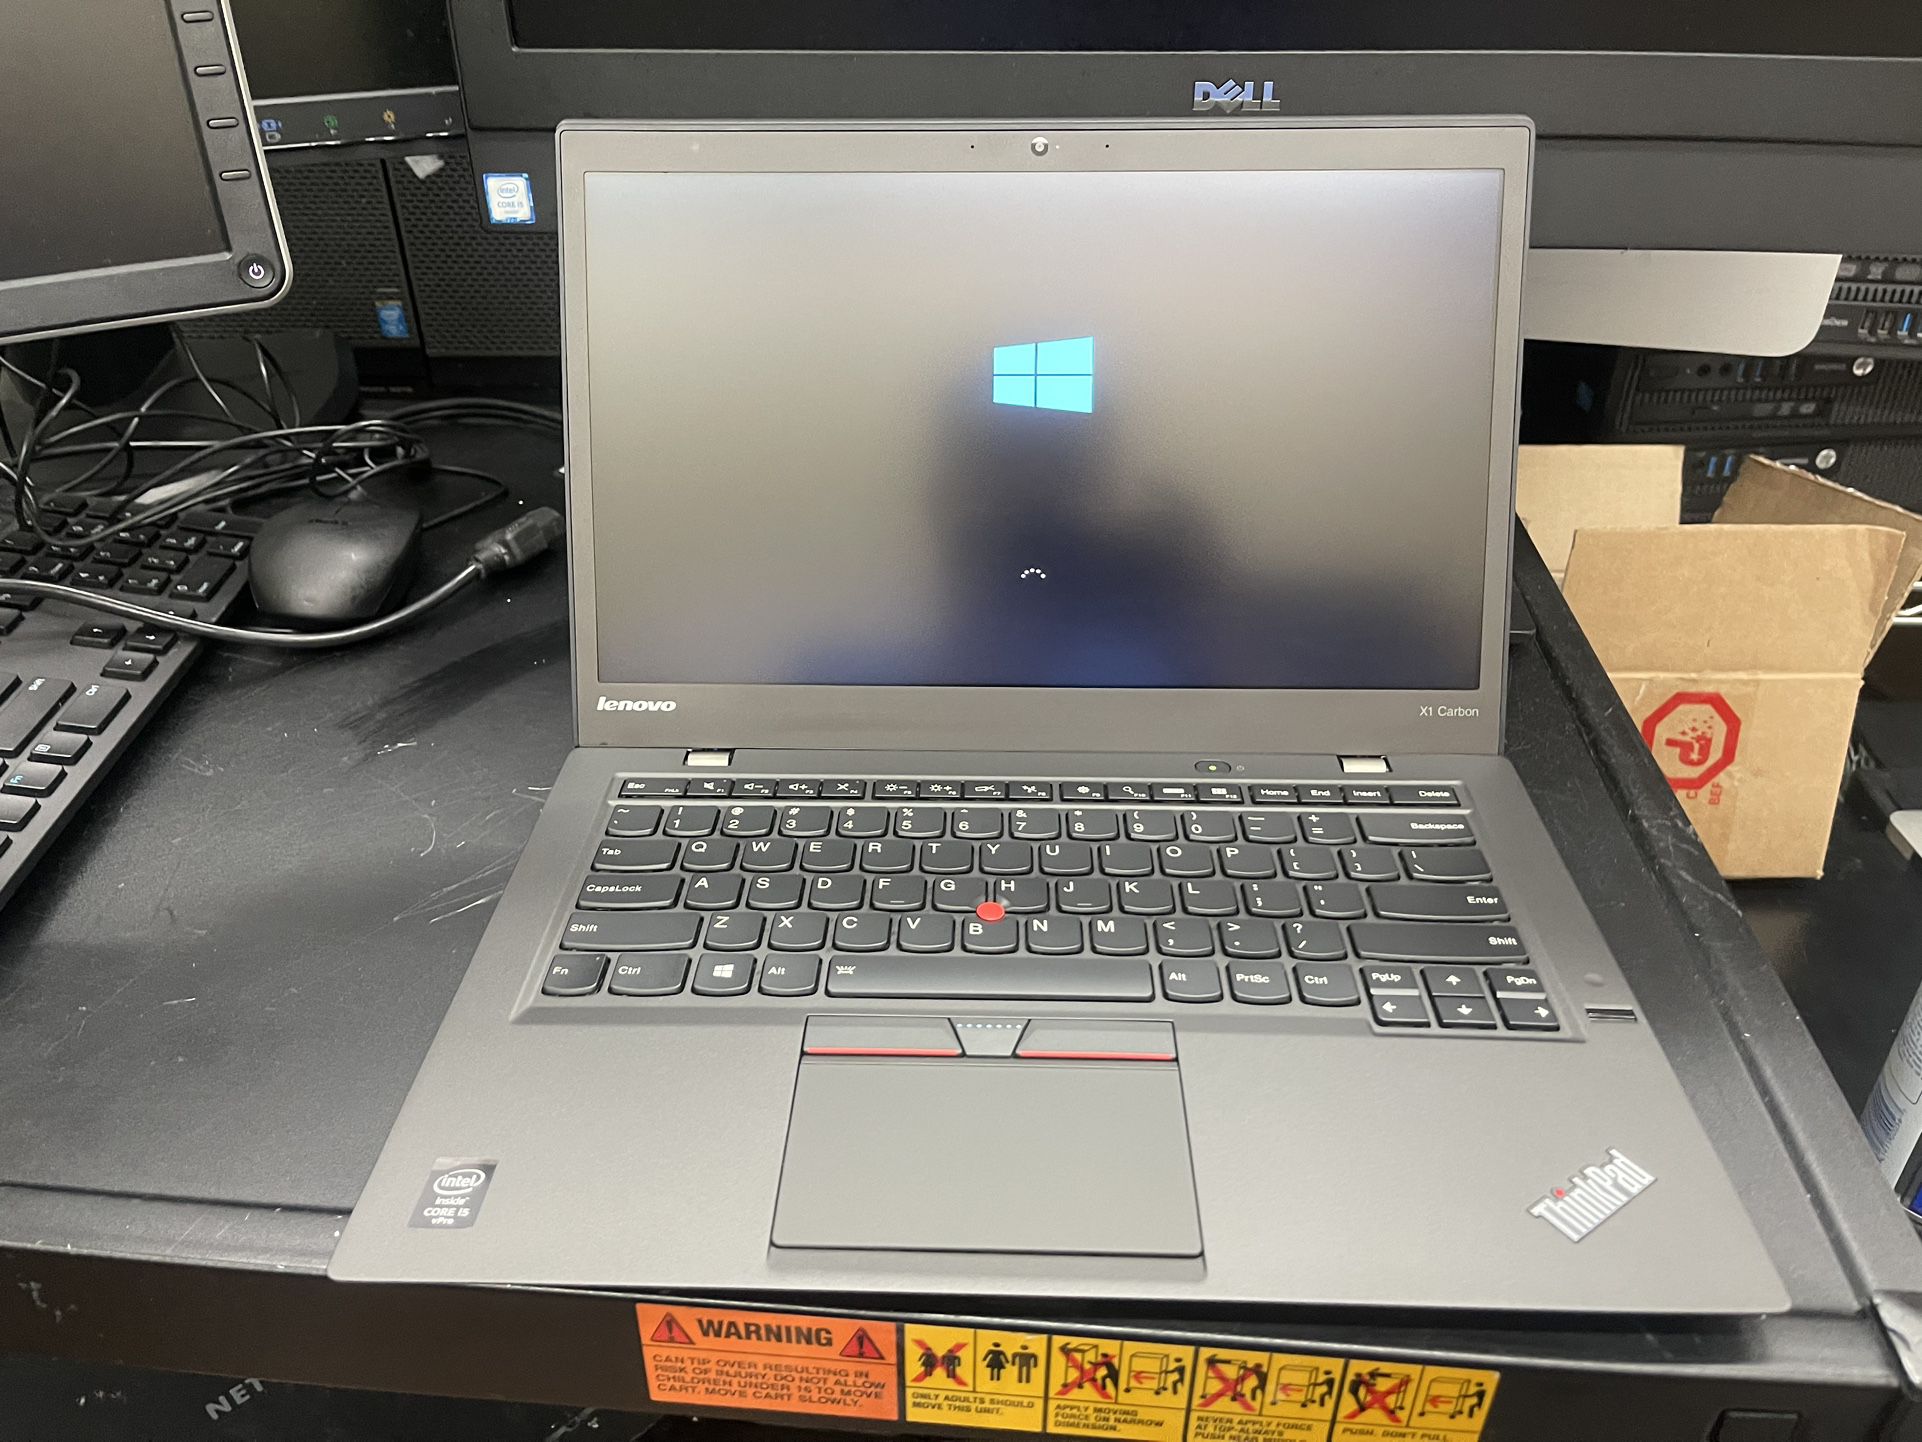 Lenovo X1 Carbon, intel Core i5 5th Gen, 8gb ram, 256gb SSD, AC adapter, excellent battery, webcam, really nice laptop.  Works perfectly, windows 10 P